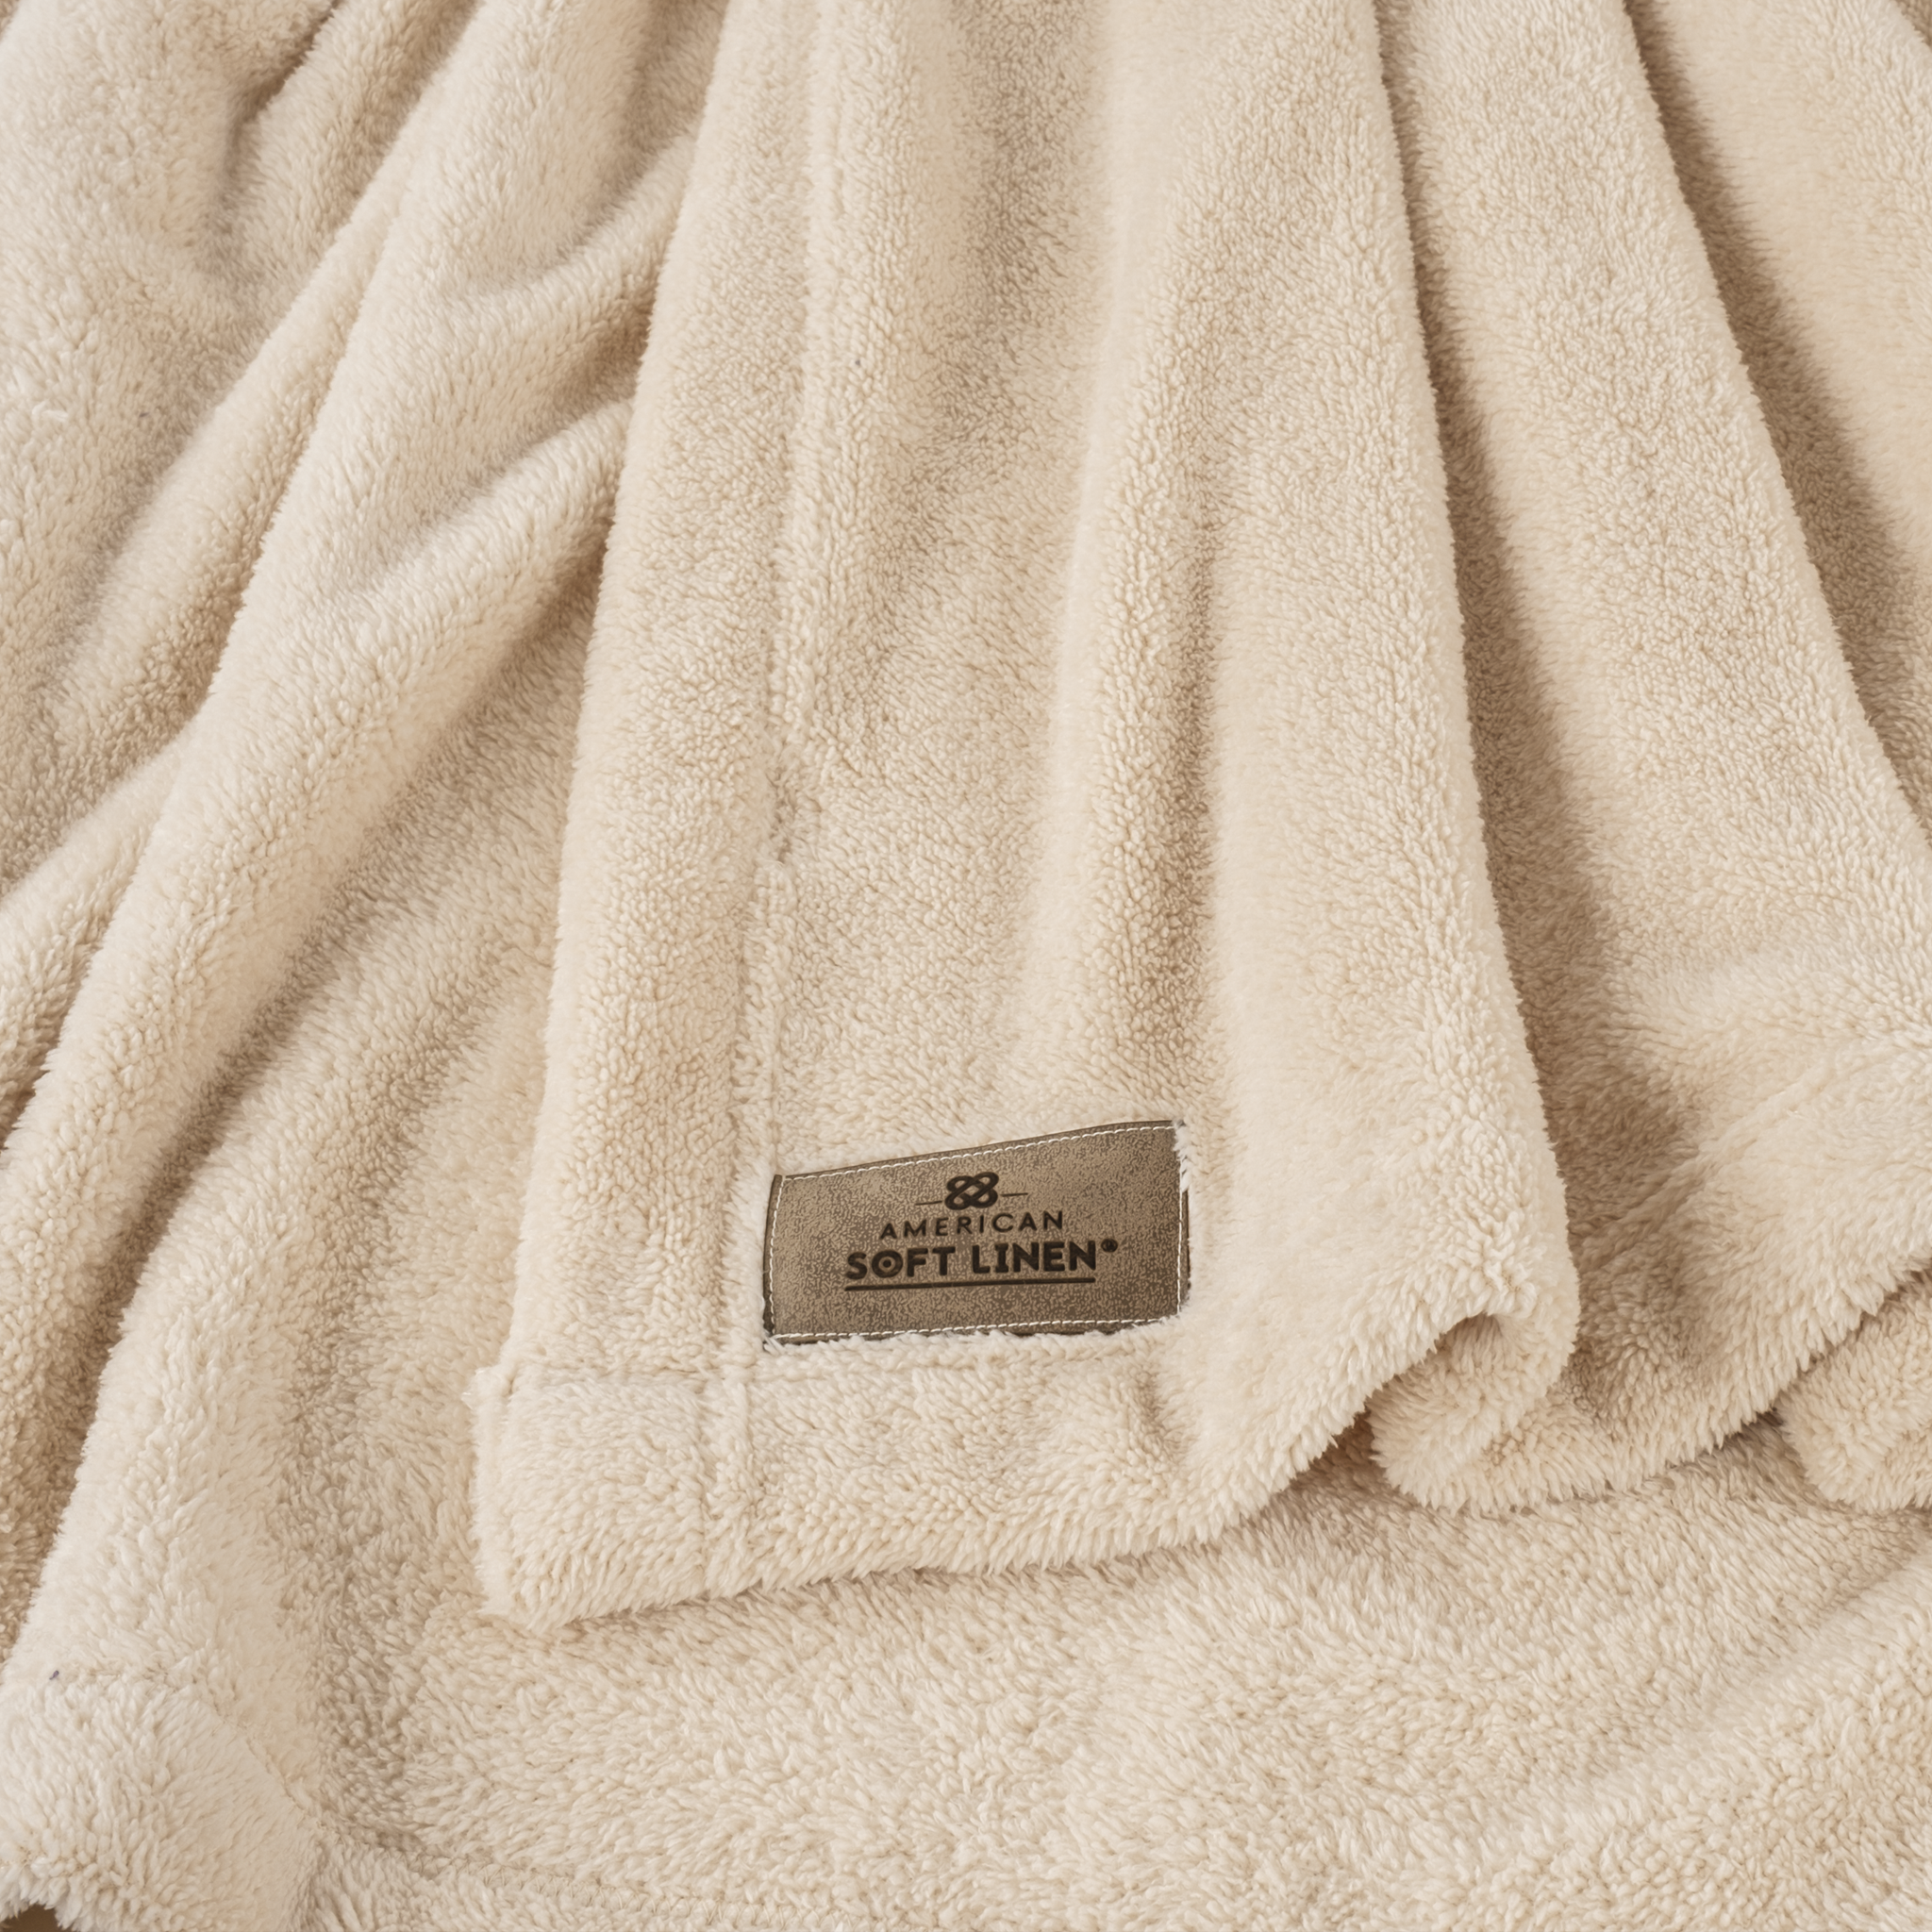 American Soft Linen - Bedding Fleece Blanket - Wholesale - 15 Set Case Pack - Twin Size 60x80 inches - Sand-Taupe - 4